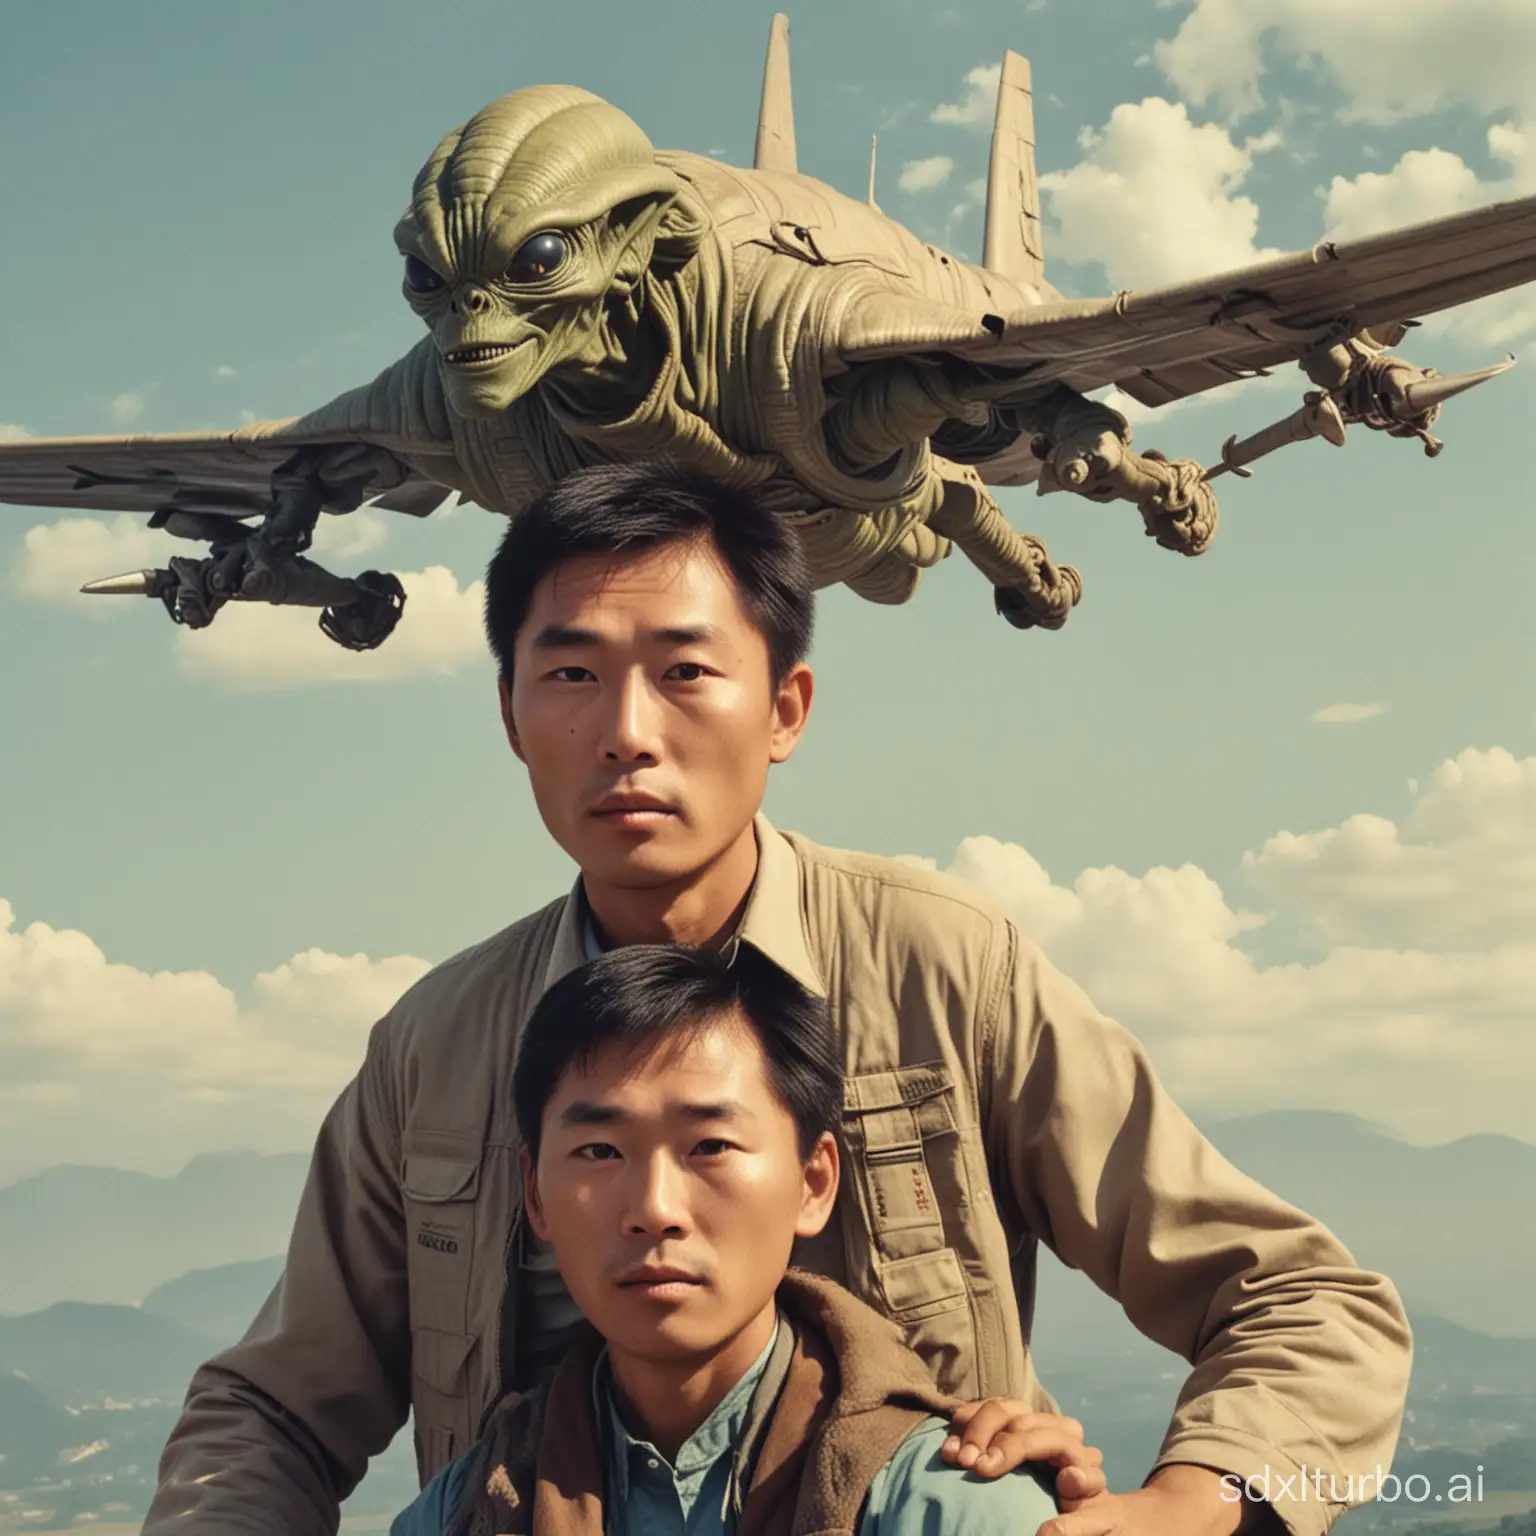 Extraterrestrial-Flight-Over-1980s-Chinese-Landscape-with-Young-Farmer-Enigmatic-Encounter-in-Crown202